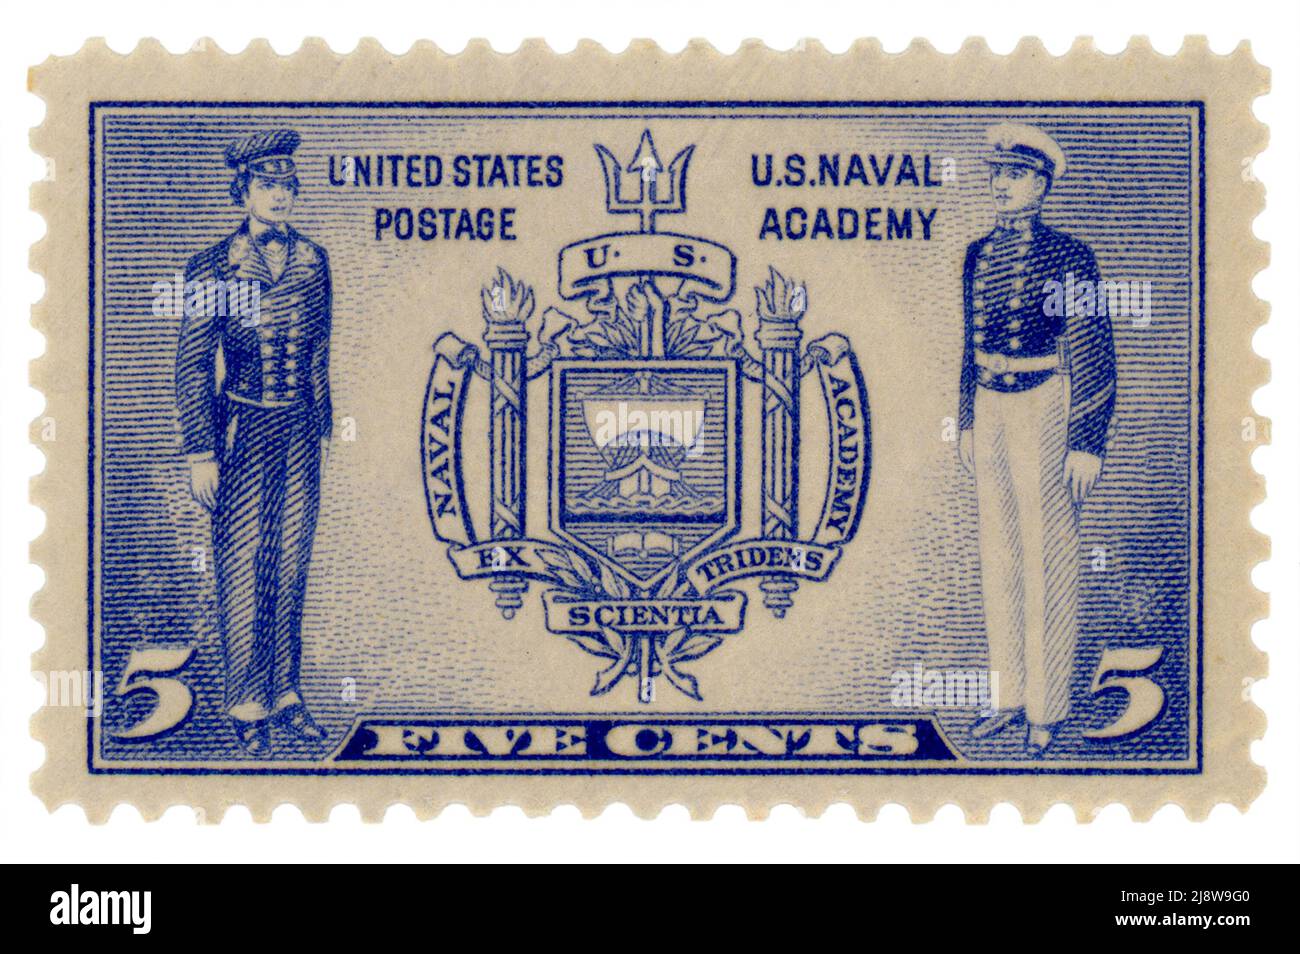 Postage stamp issued in 1937 with seal of the U.S. Naval Academy. Stock Photo